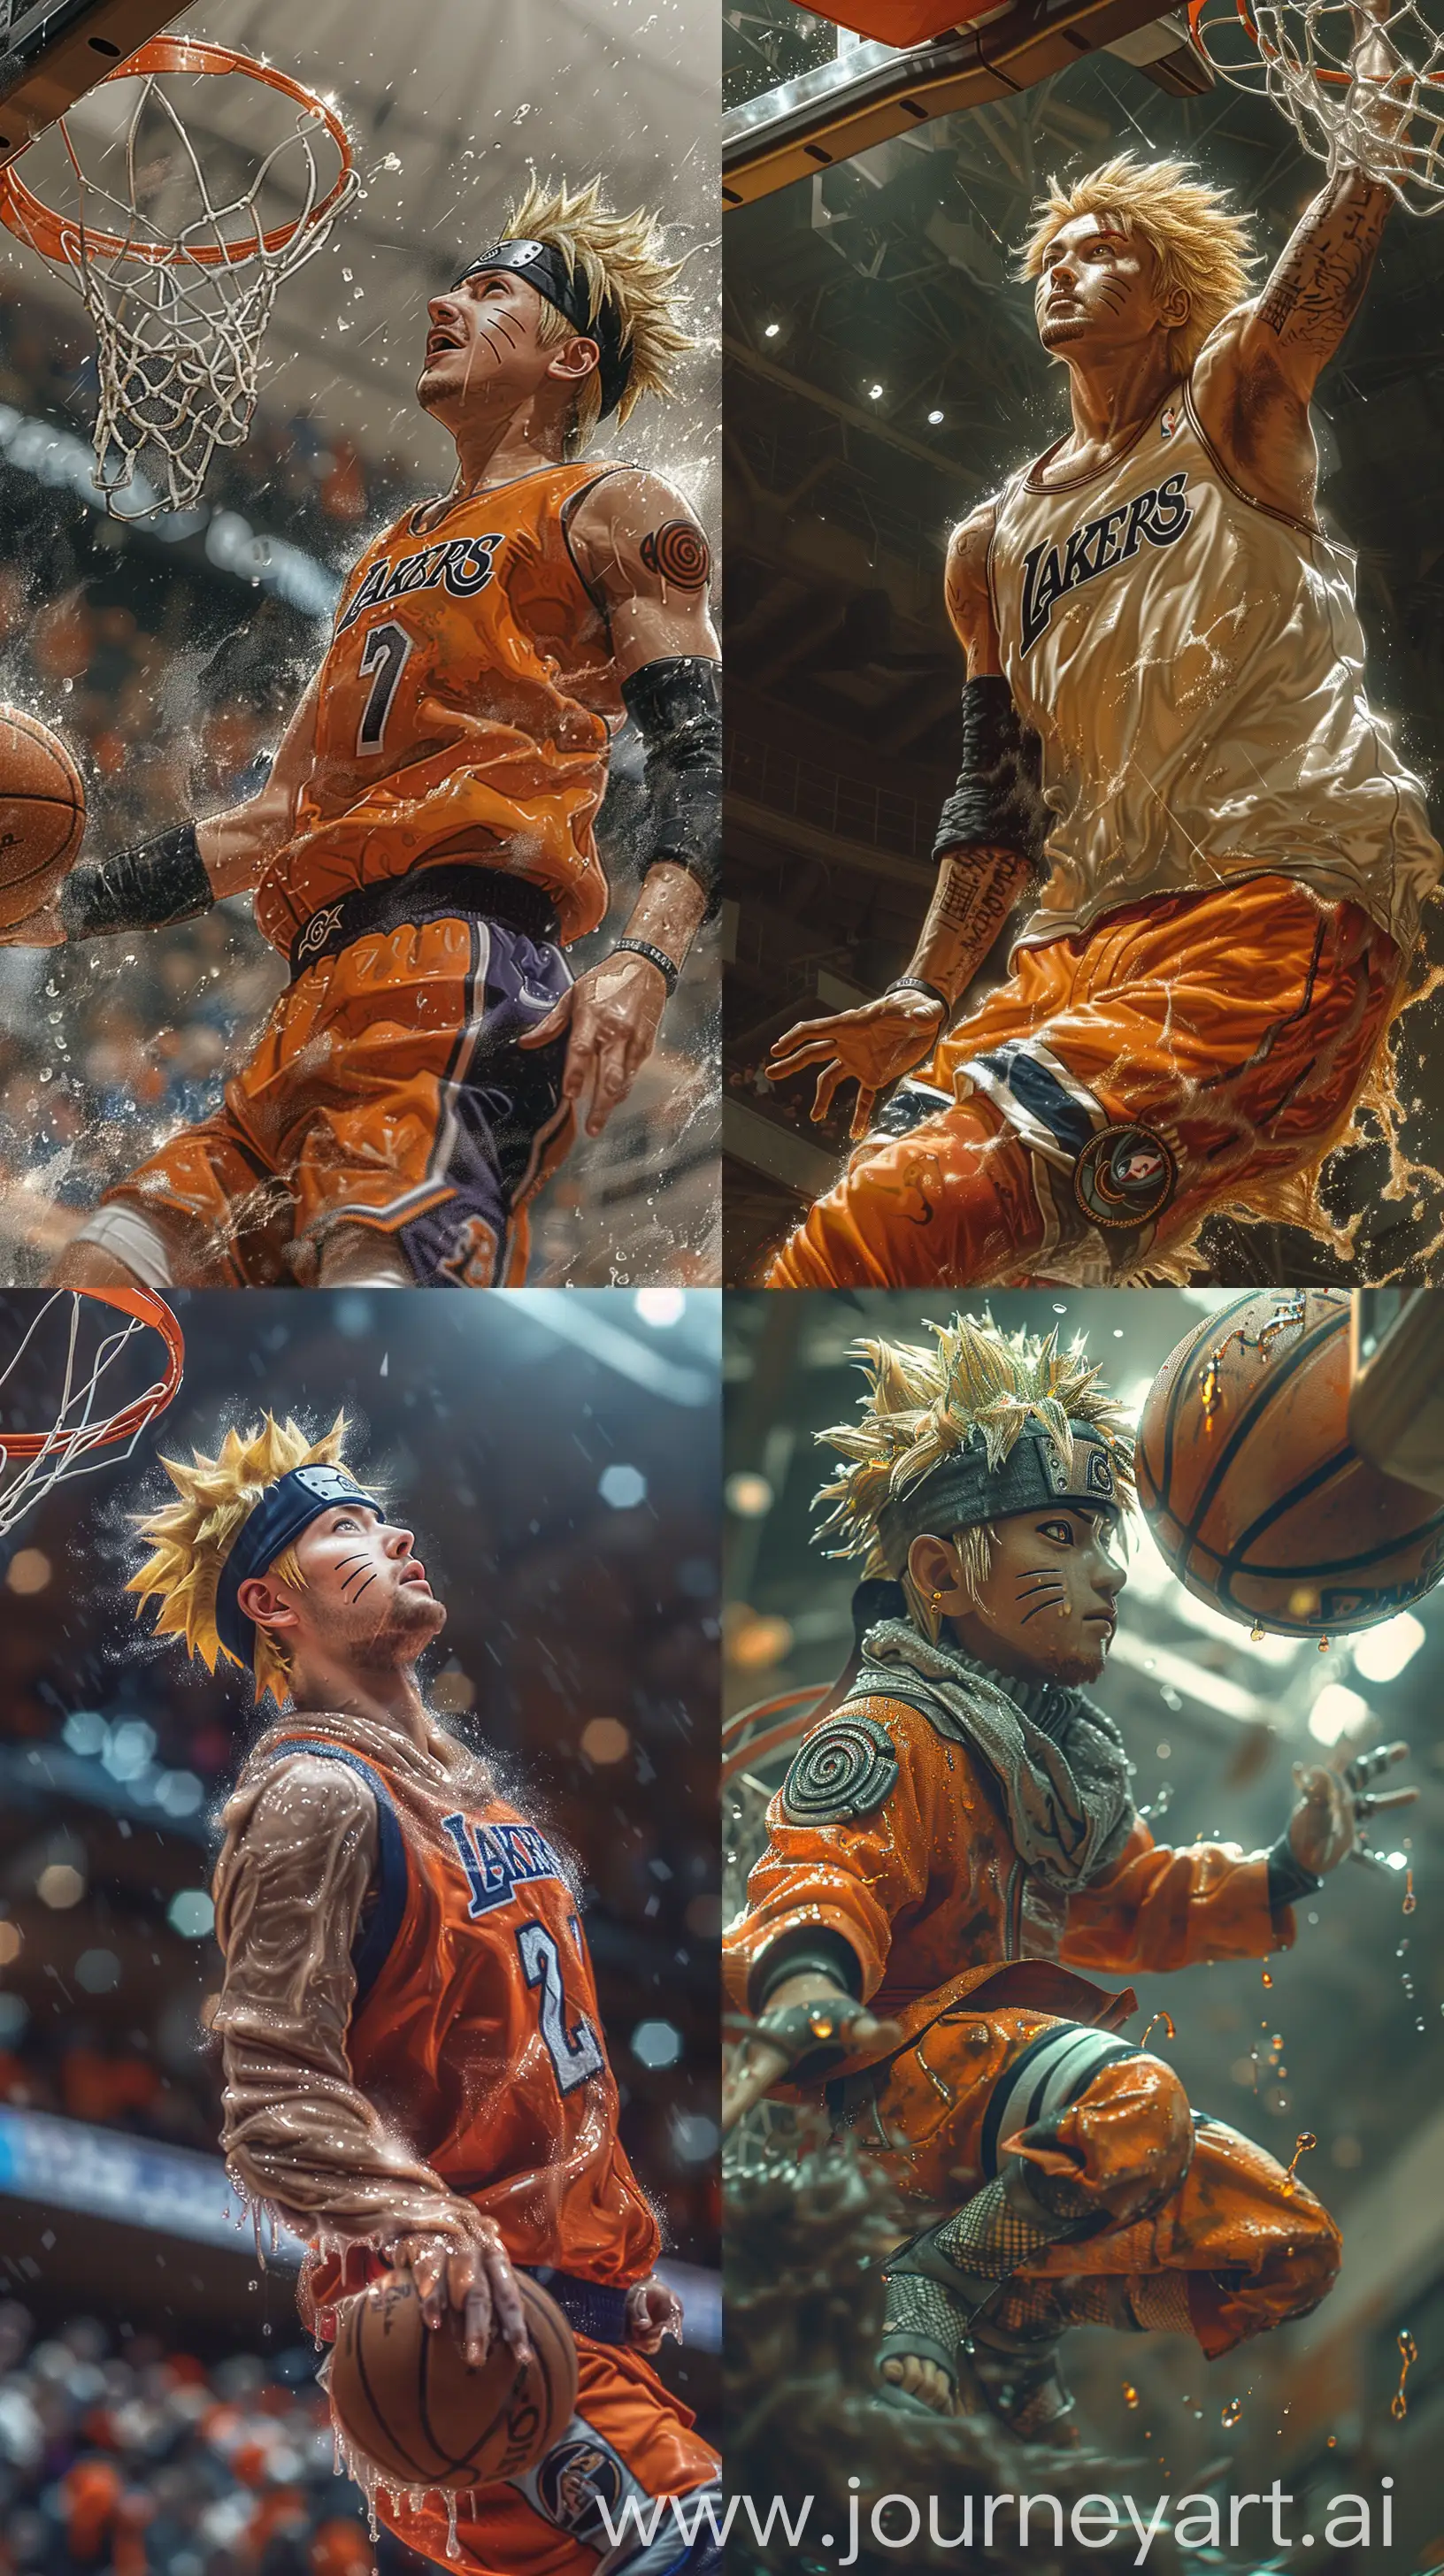 Naruto-Dunking-in-Lakers-Uniform-Surrealistic-Basketball-Action-Art